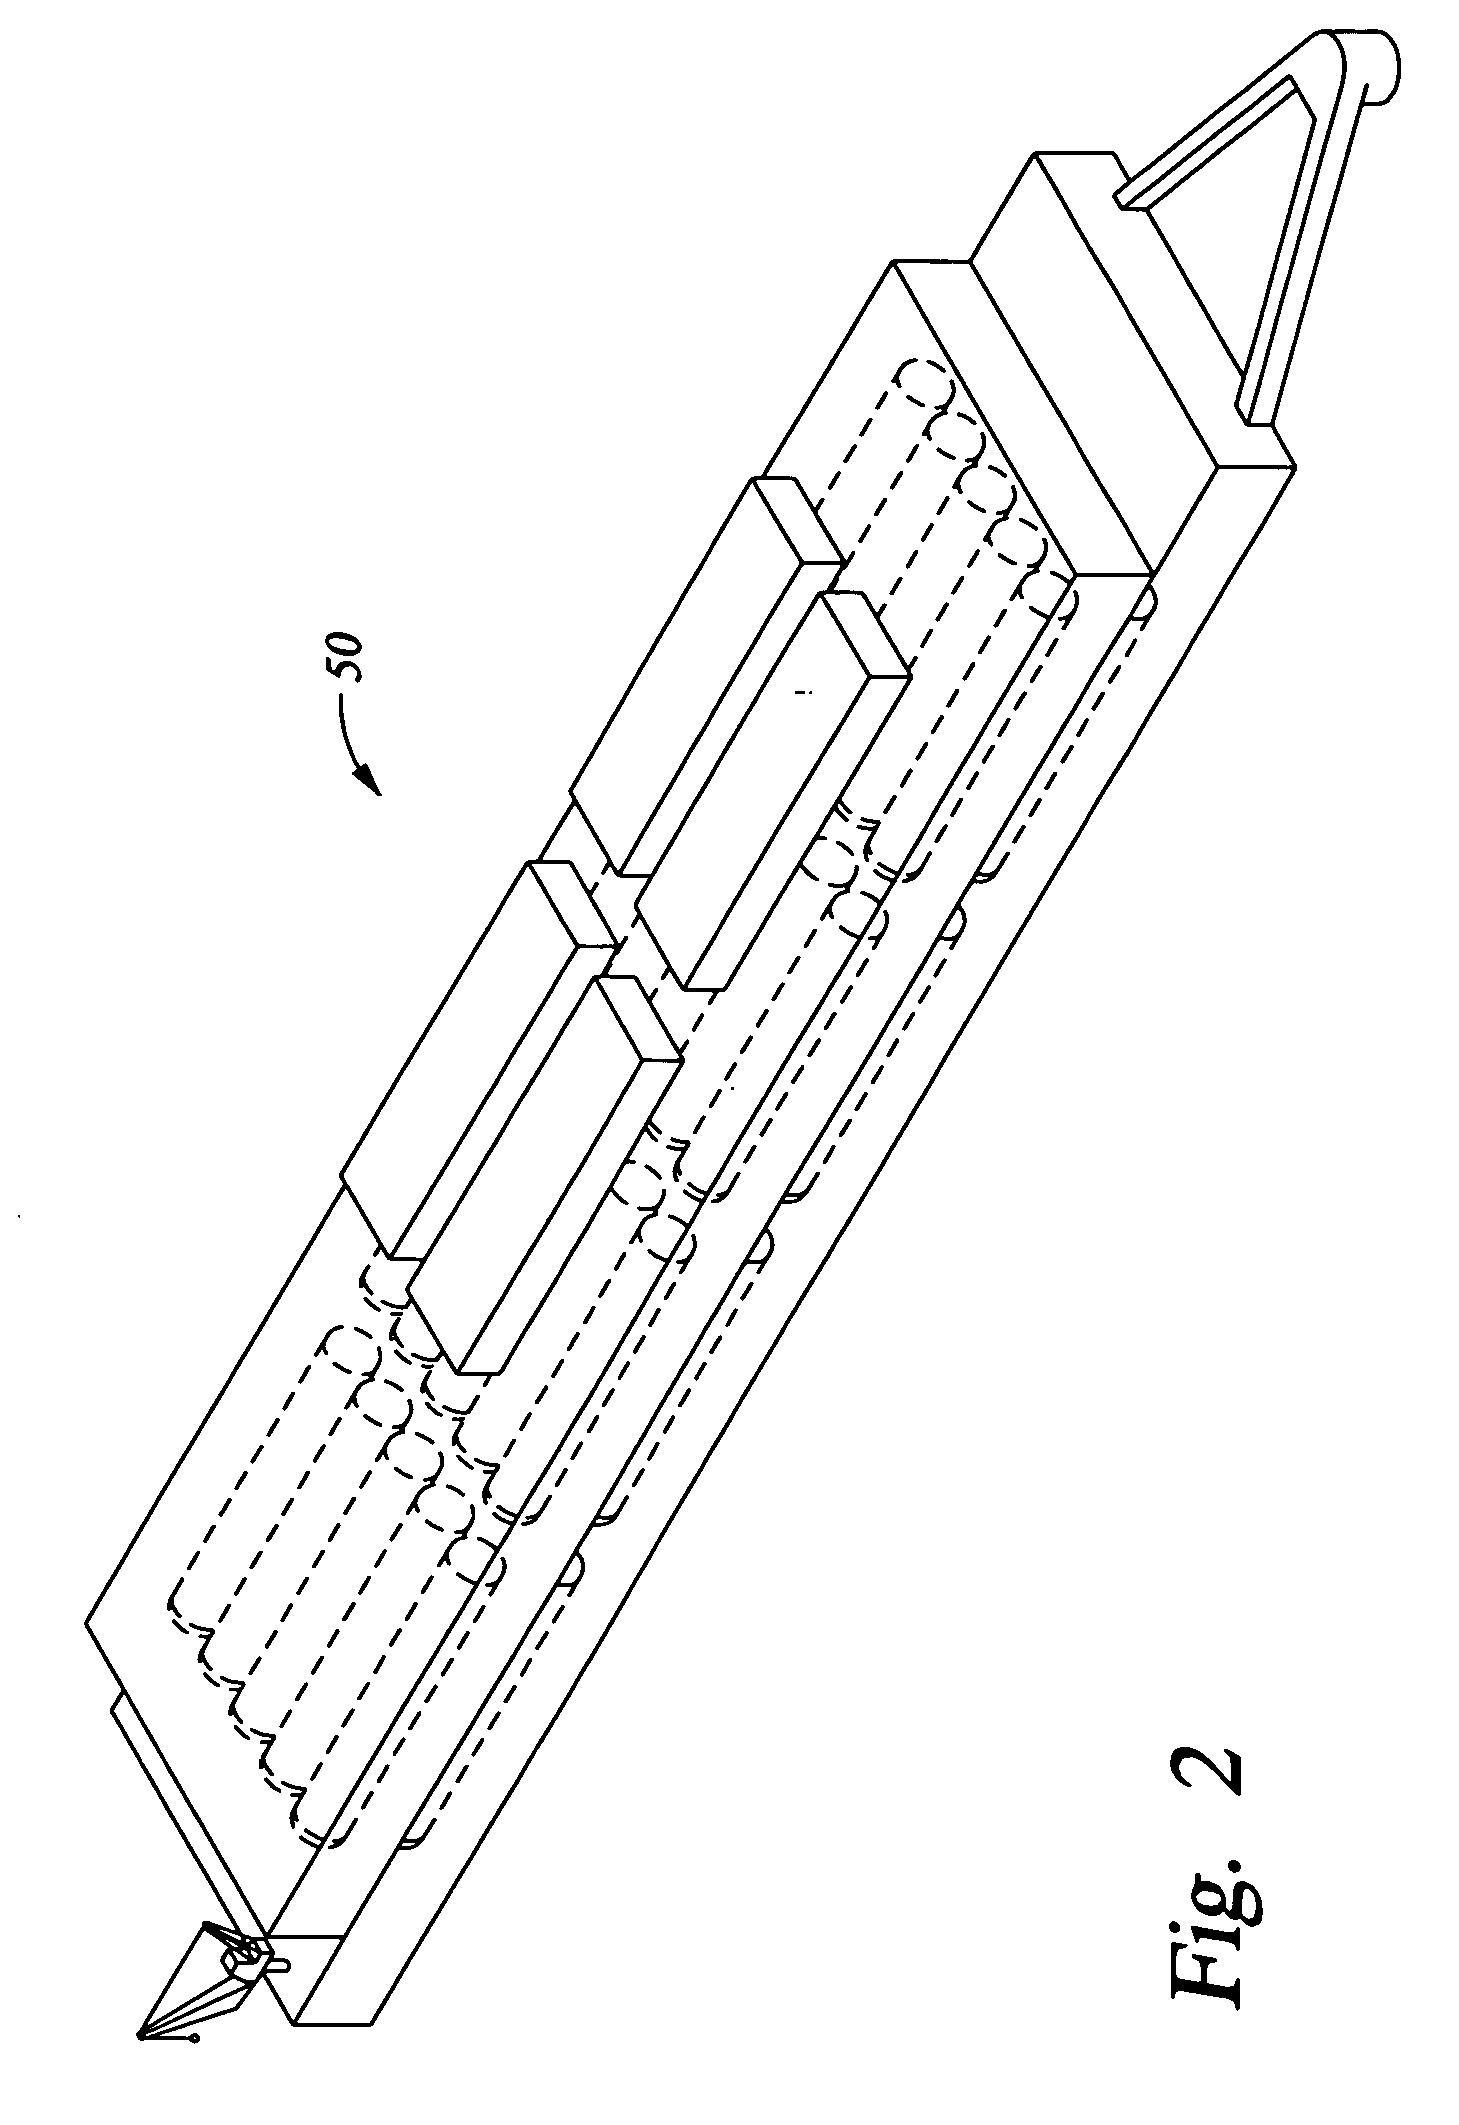 Apparatus for cryogenic fluids having floating liquefaction unit and floating regasification unit connected by shuttle vessel, and cryogenic fluid methods